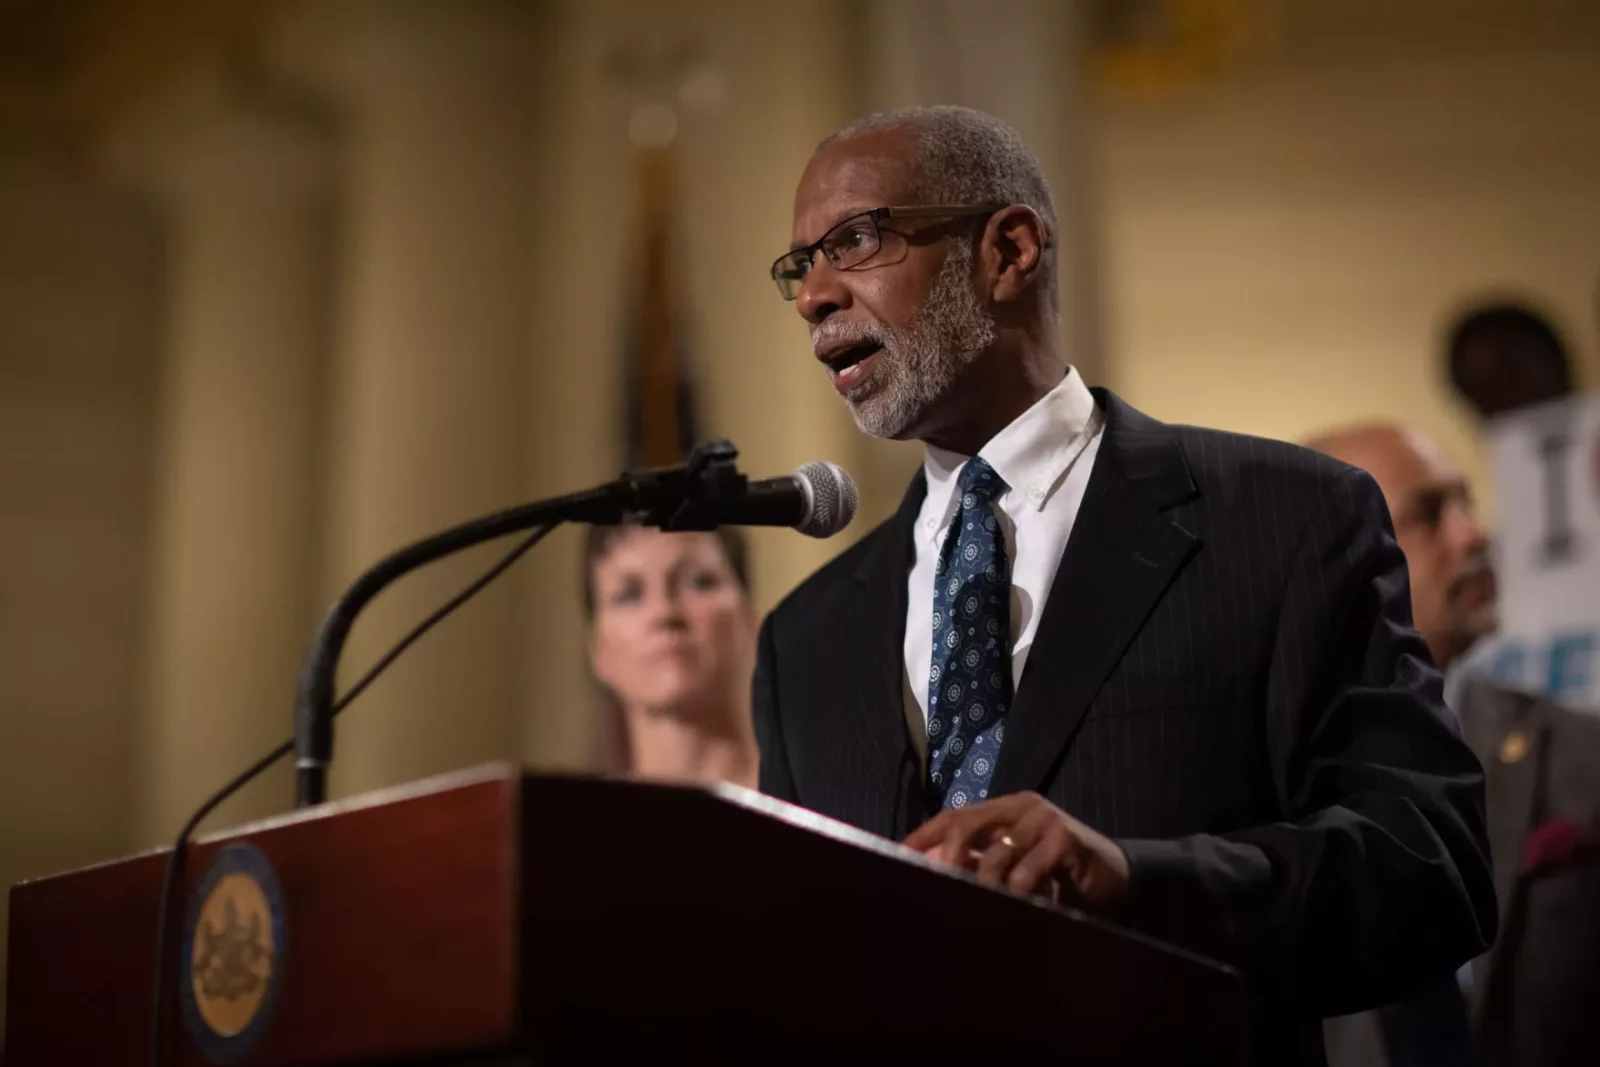 Sen. Art Haywood (D., Montgomery) wants to change the way use-of-force cases are investigated in Pennsylvania so families of victims and the public will have more faith in the findings. (Commonwealth Media Services)